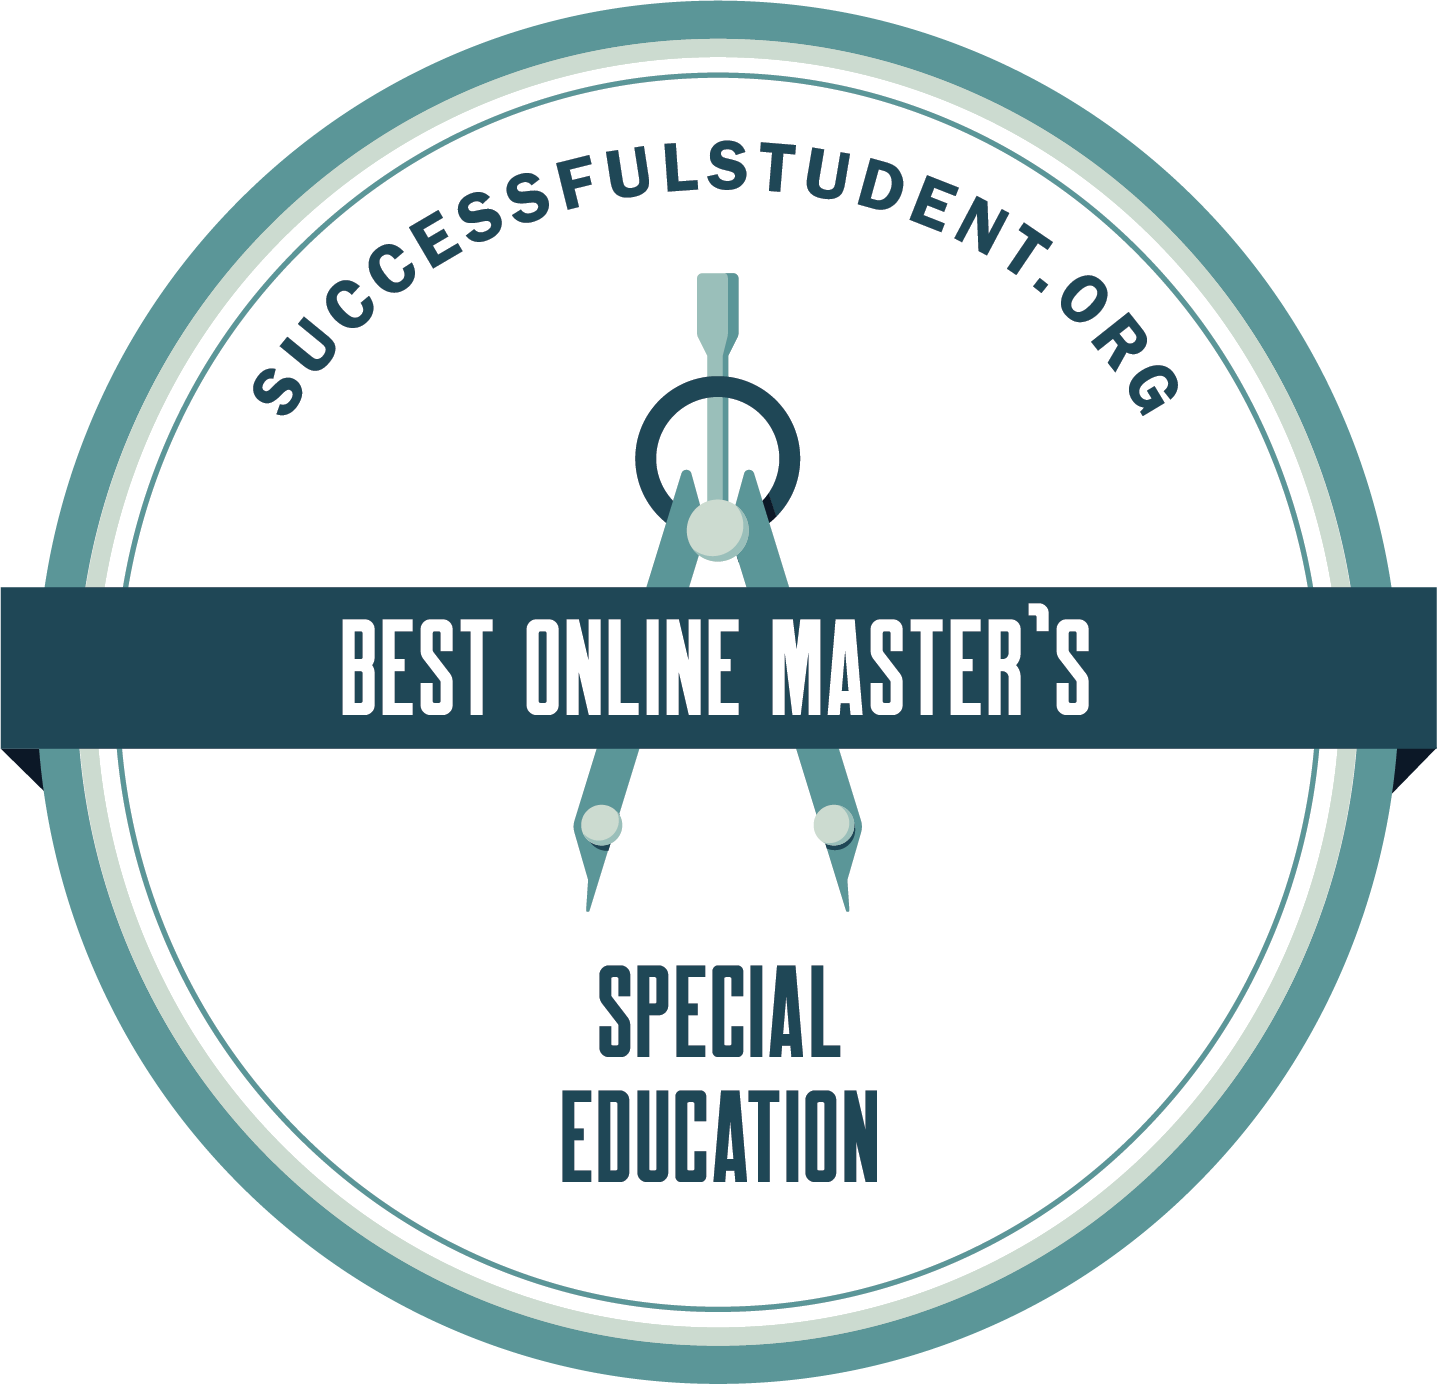 The Best Online Master’s Degrees in Special Education's Badge